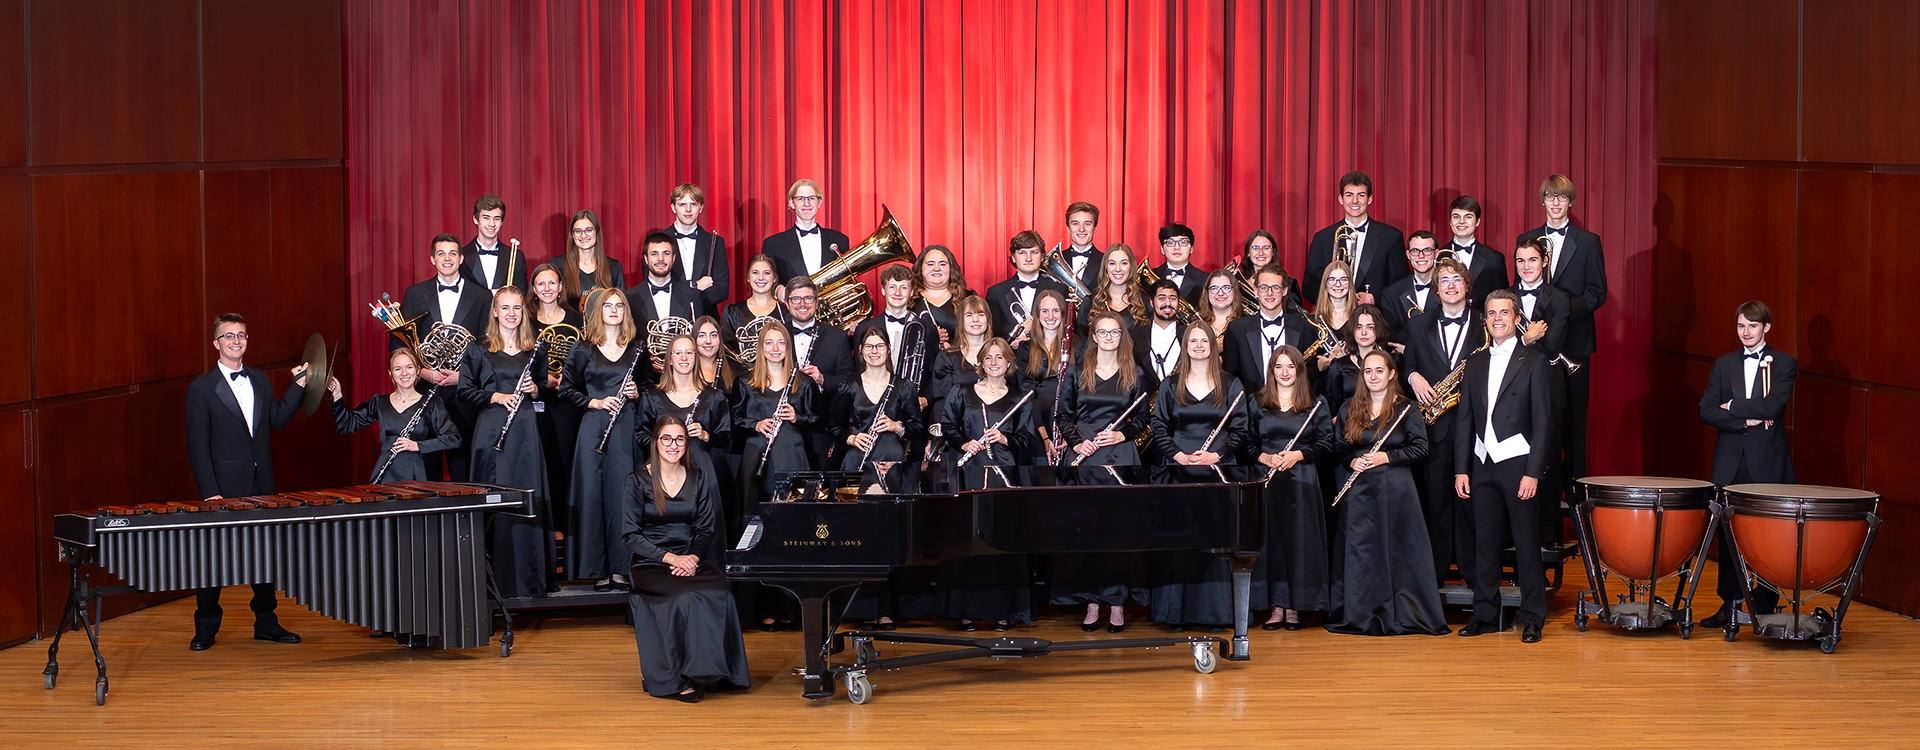 Concert band group image